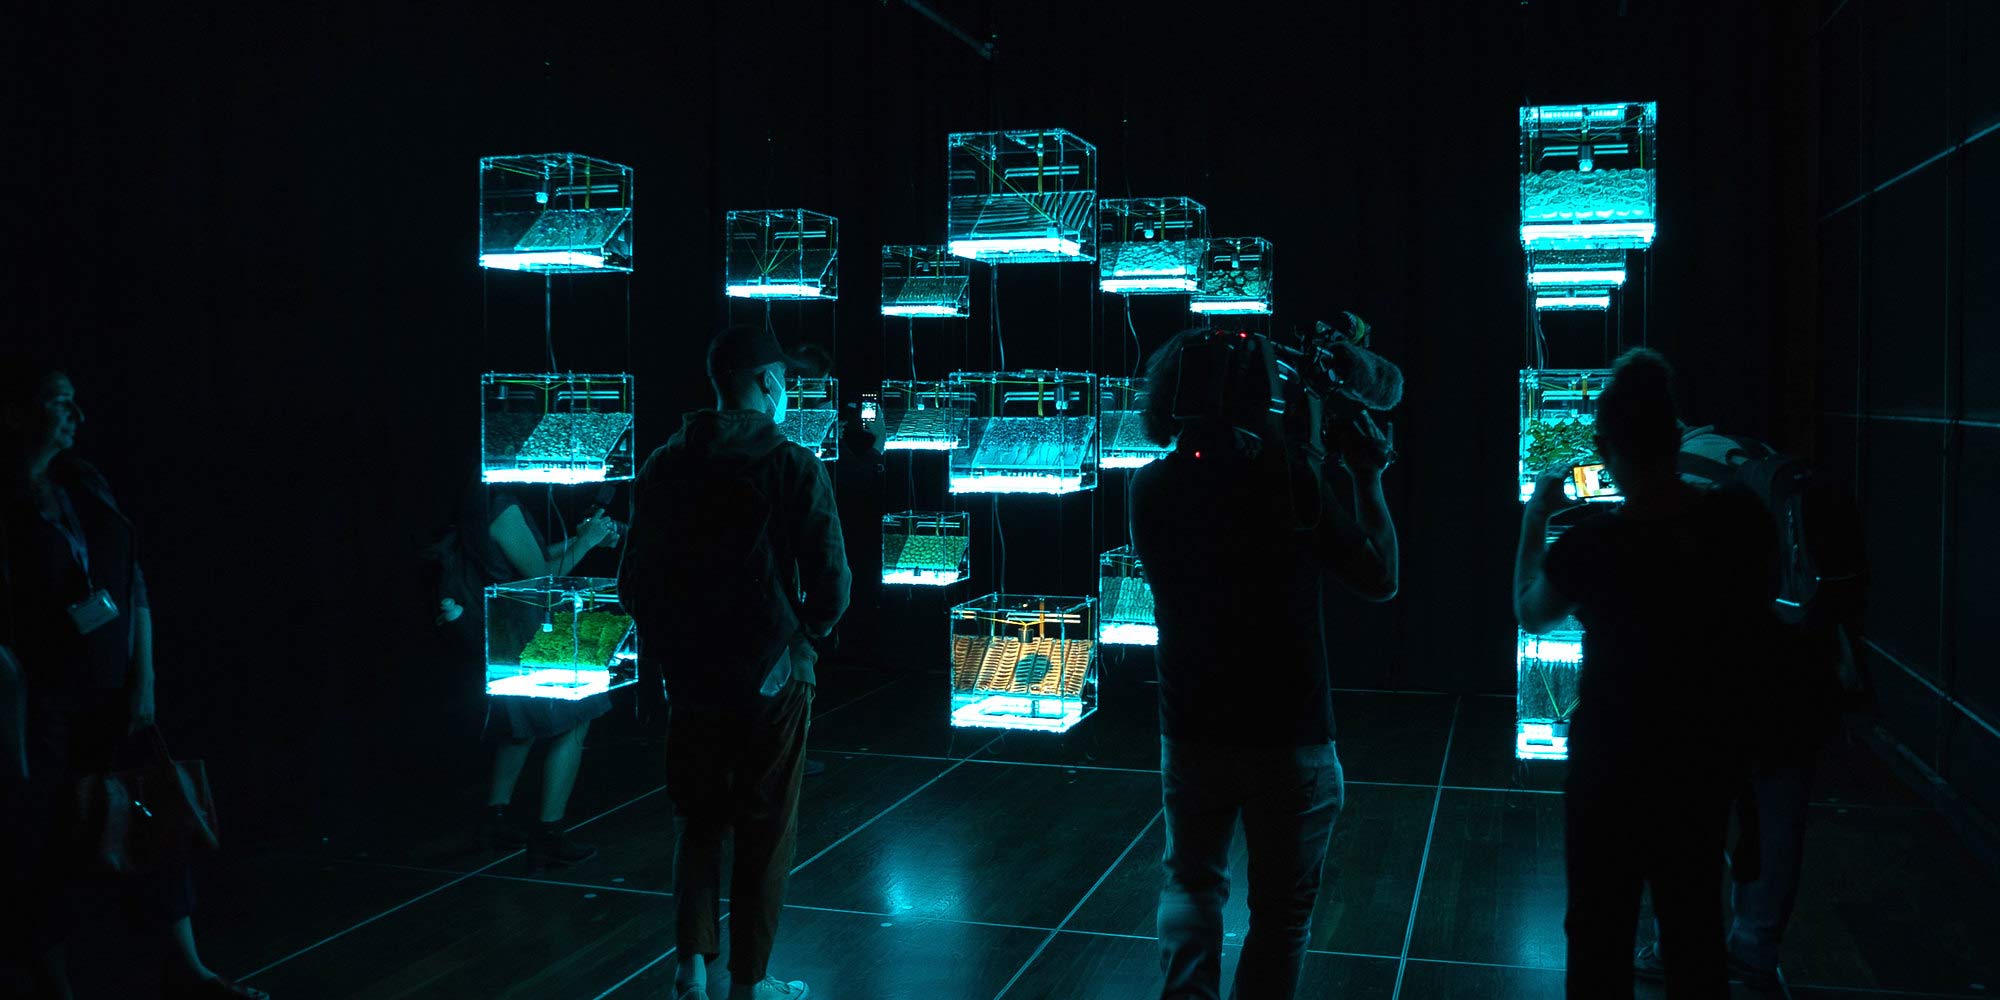 CyberArts Exhibition at the Ars Electronica Festival